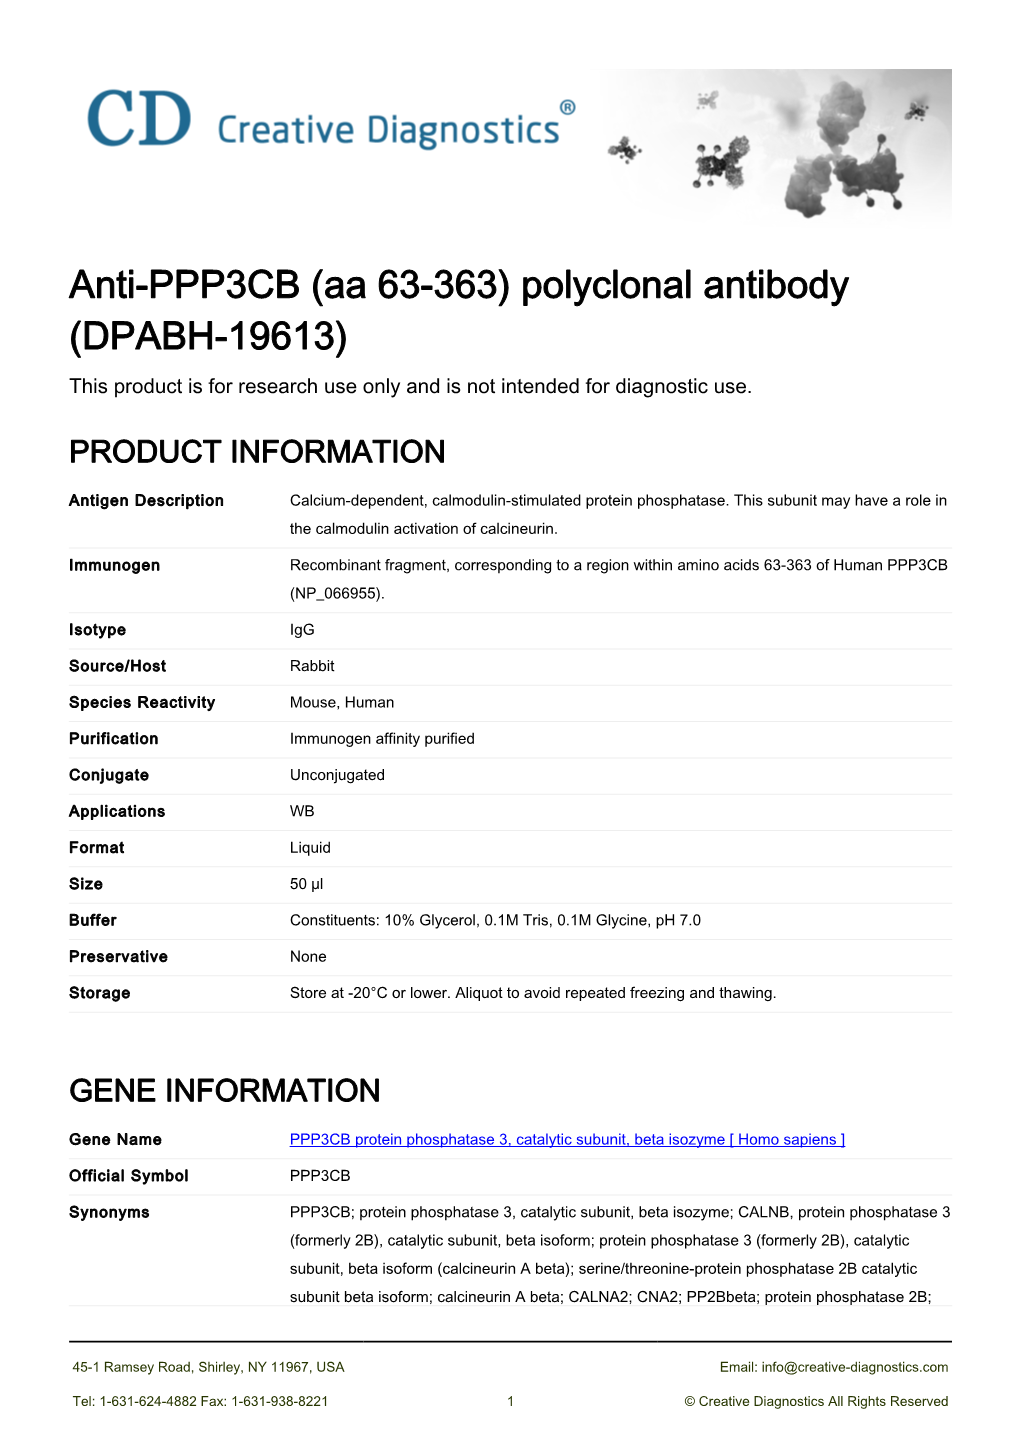 Anti-PPP3CB (Aa 63-363) Polyclonal Antibody (DPABH-19613) This Product Is for Research Use Only and Is Not Intended for Diagnostic Use